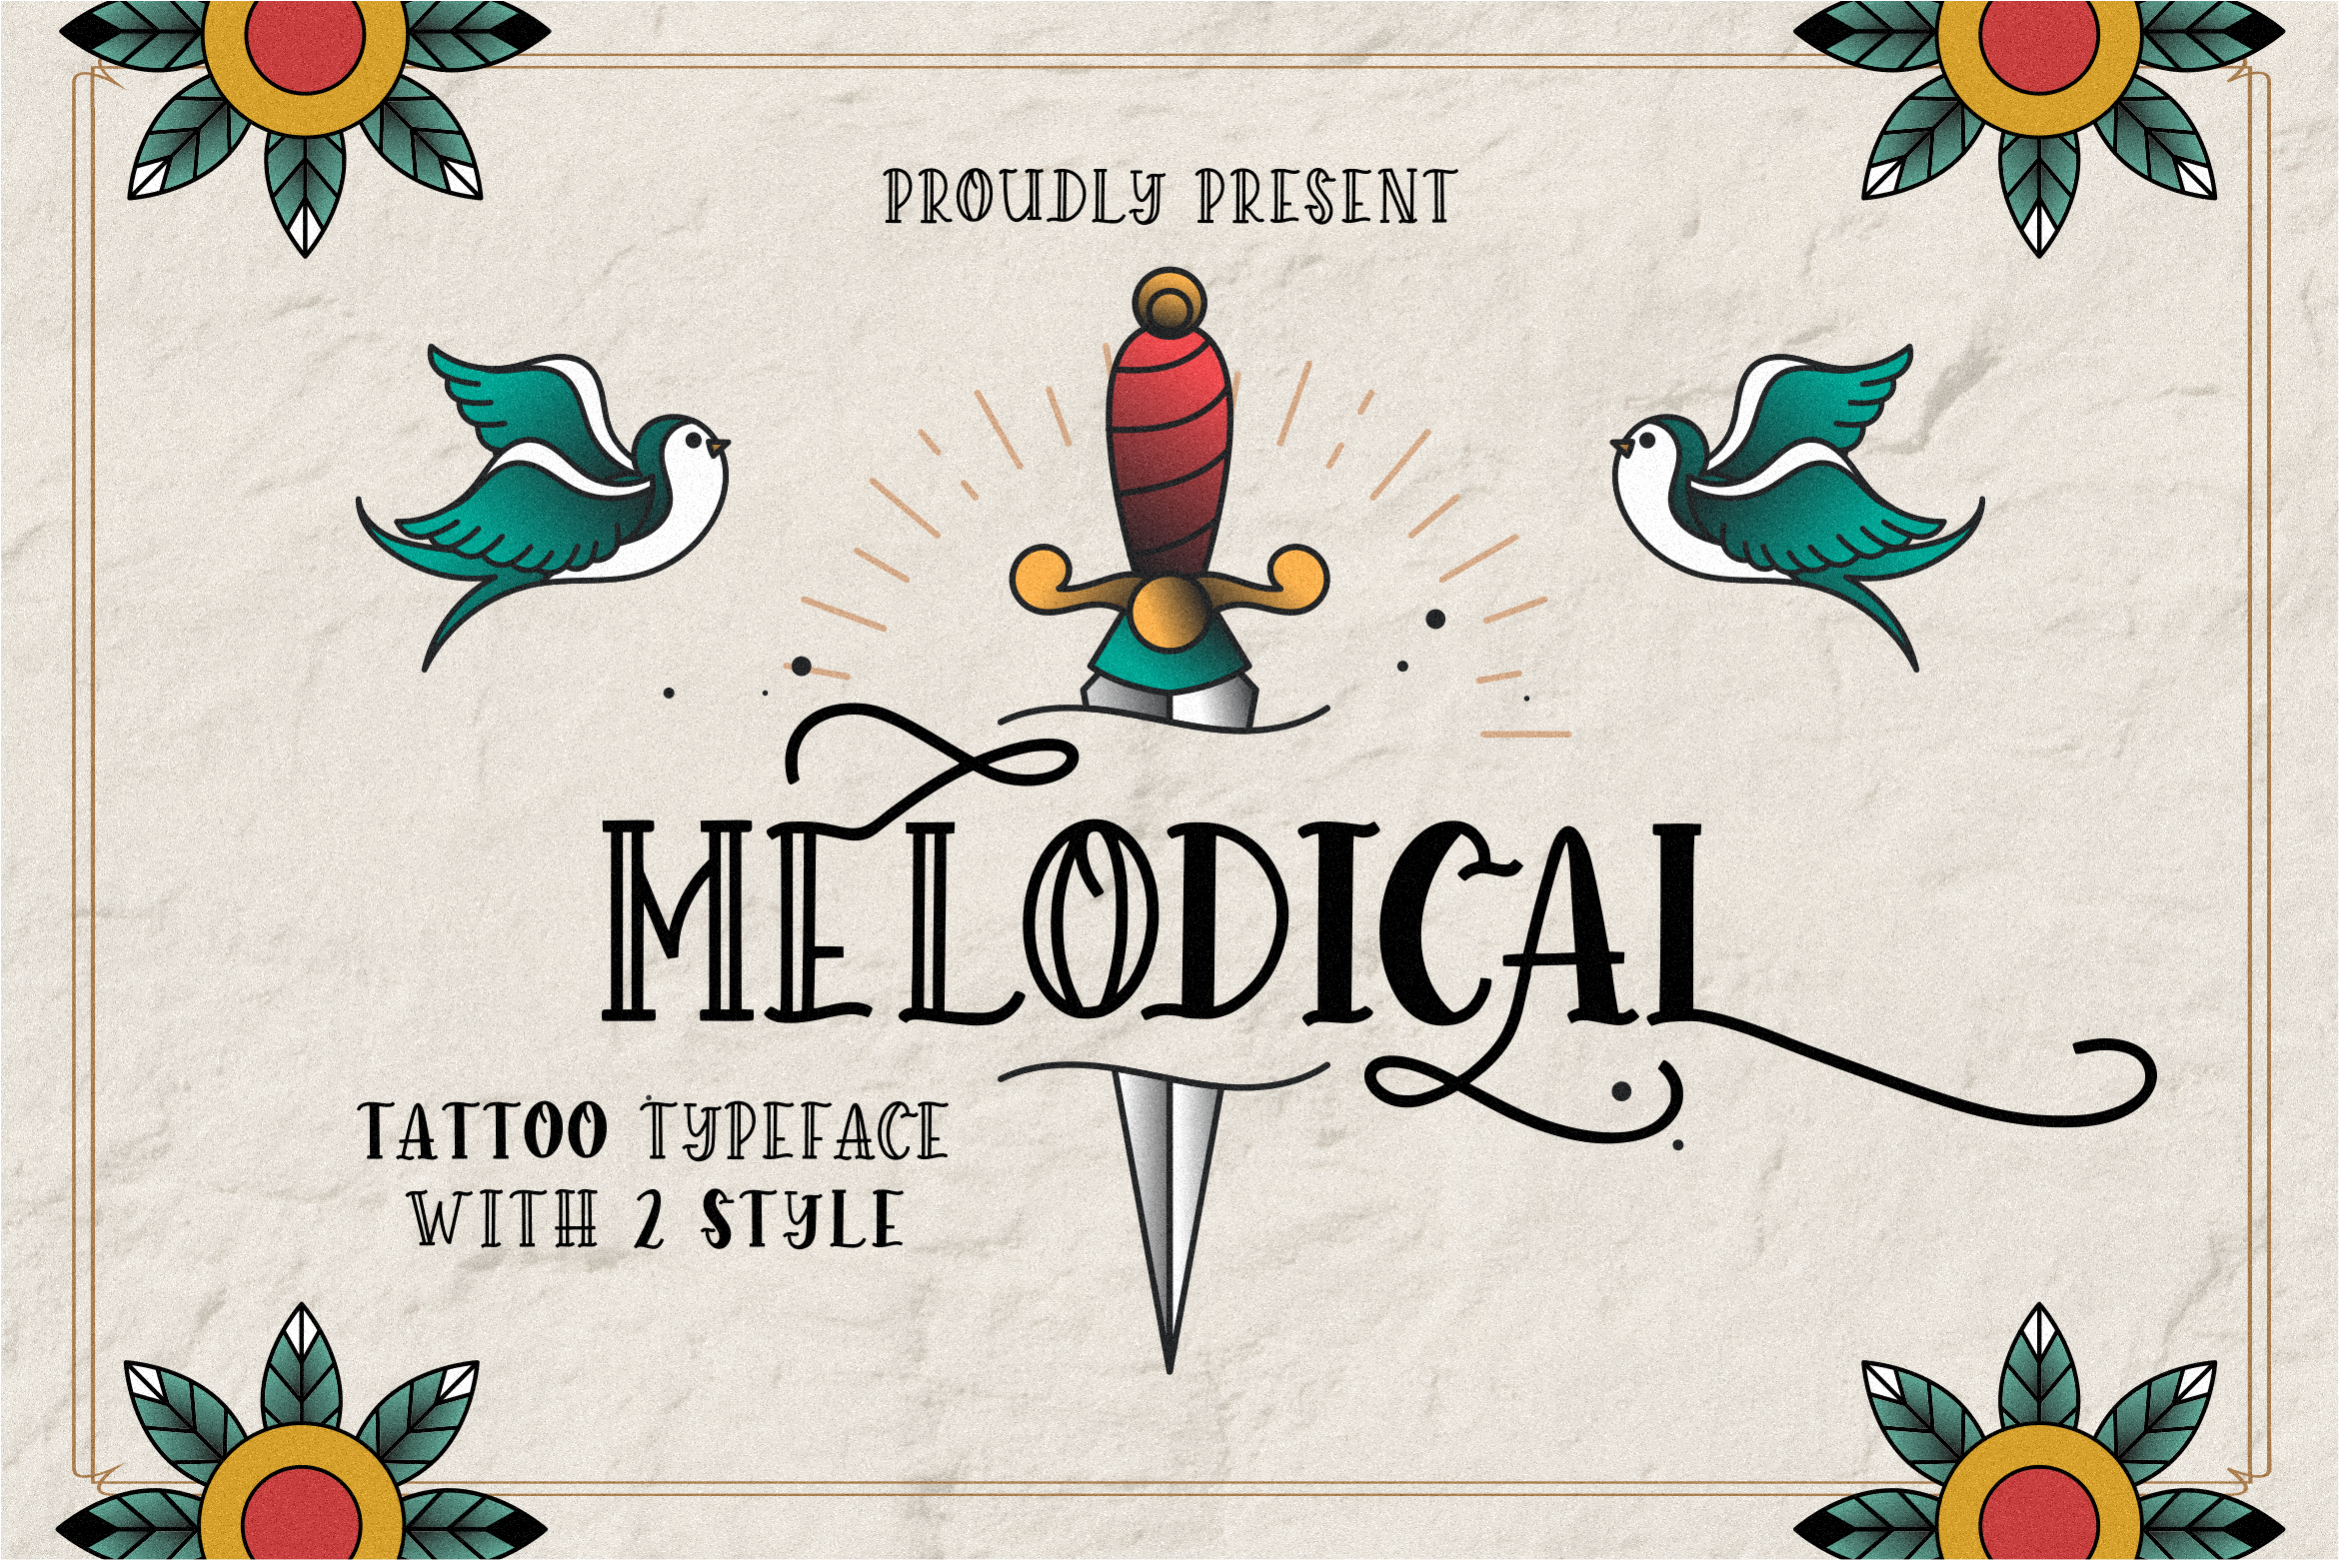 Melodical